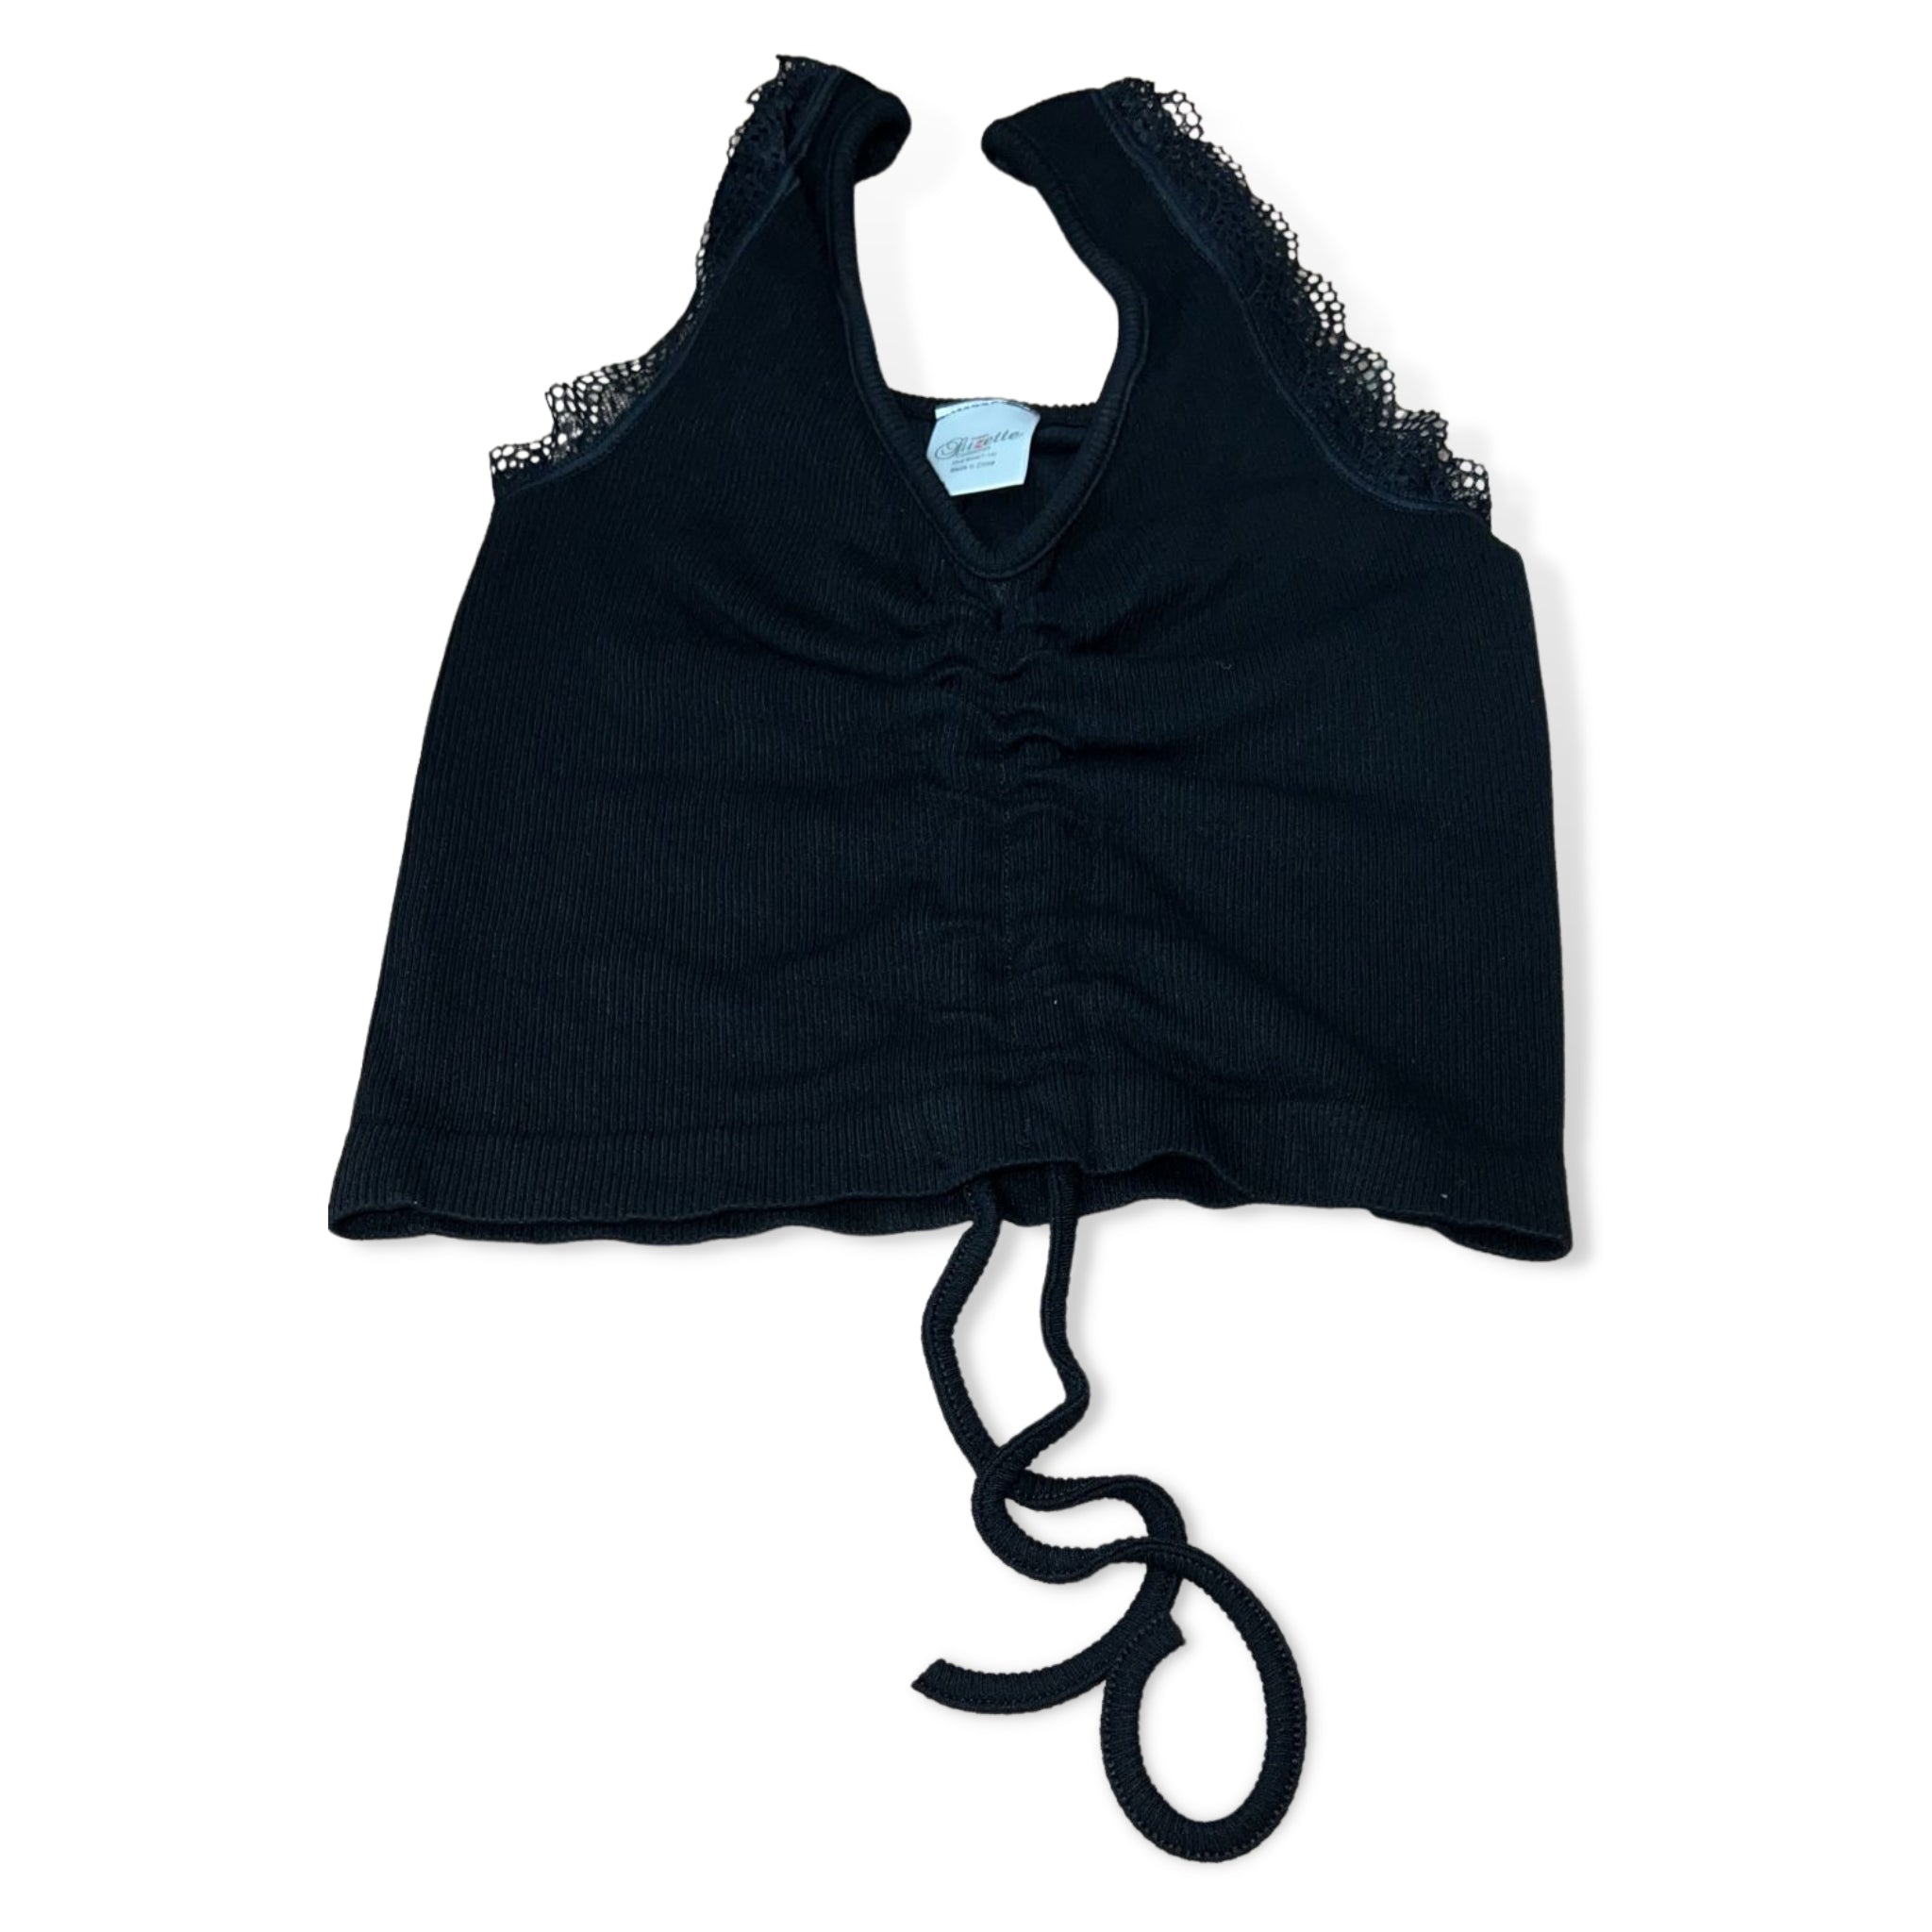 Suzette Black Ribbed Lace Ruching Crop Top